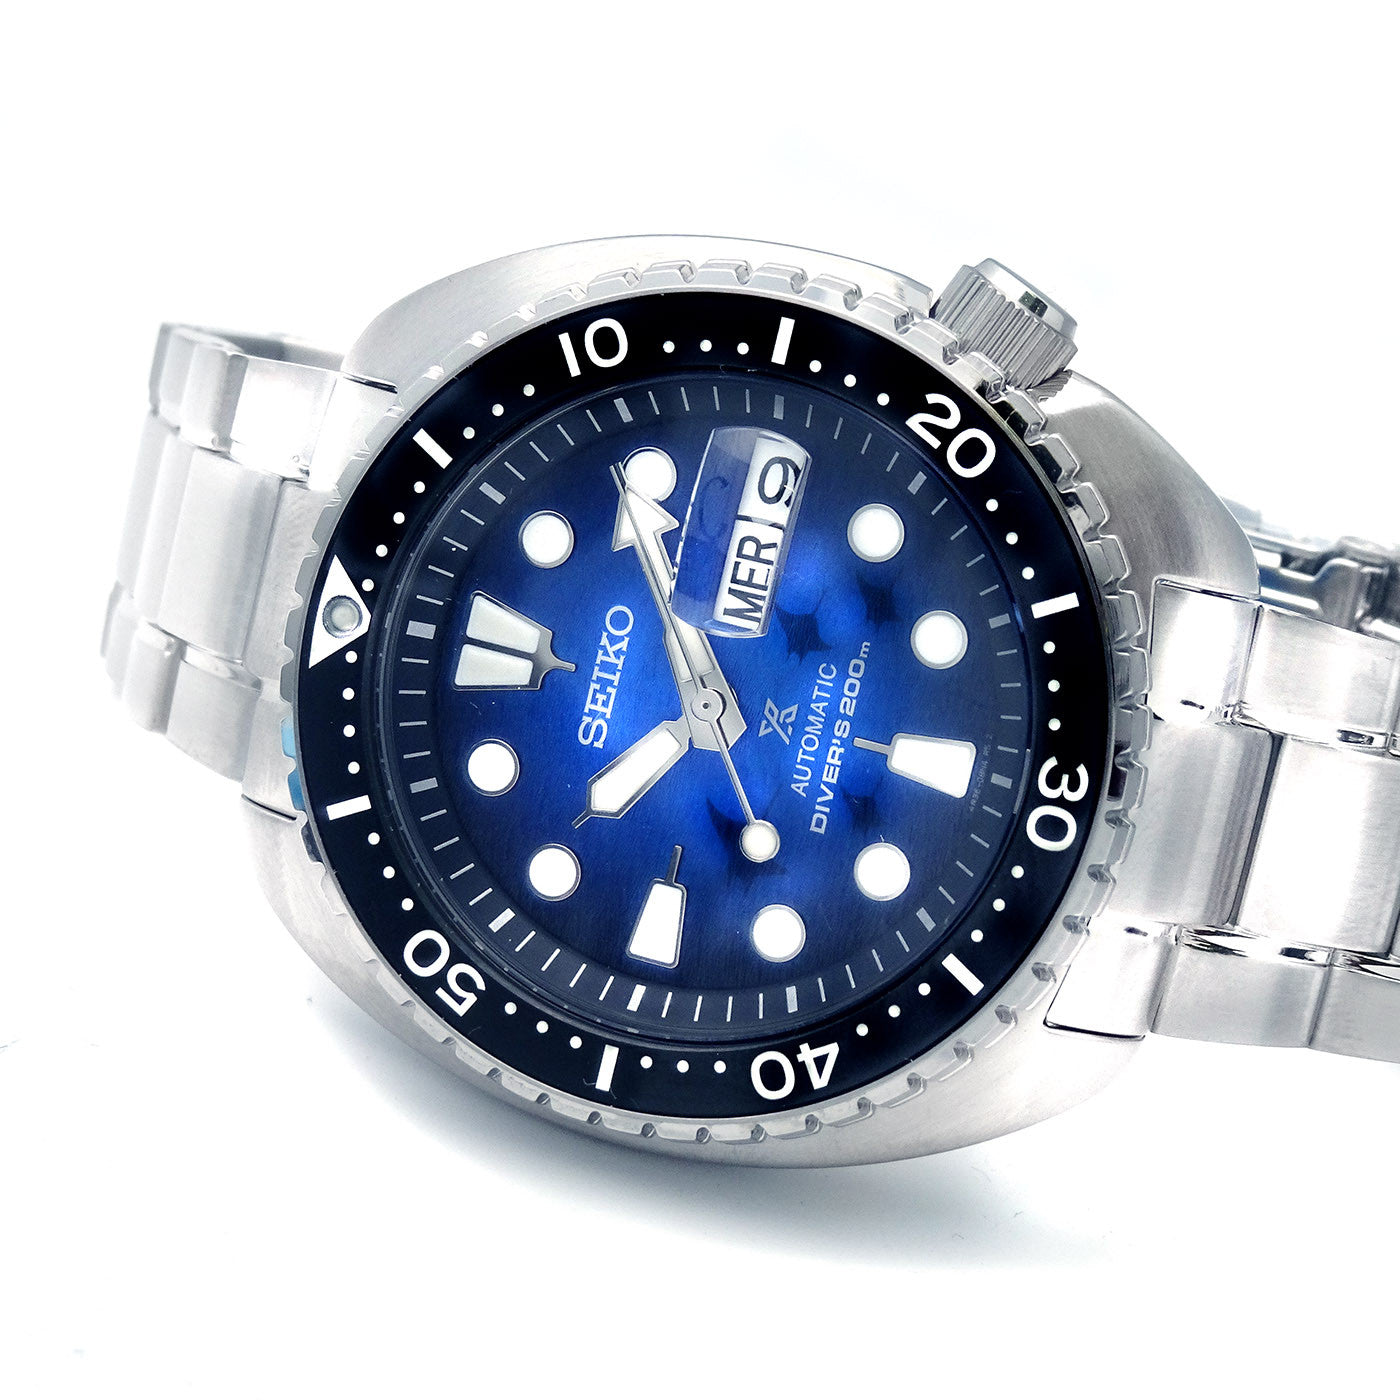 Seiko SRPE39K1 Prospex King Turtle Save the Ocean Automatic Watch-Watch Portal Philippines